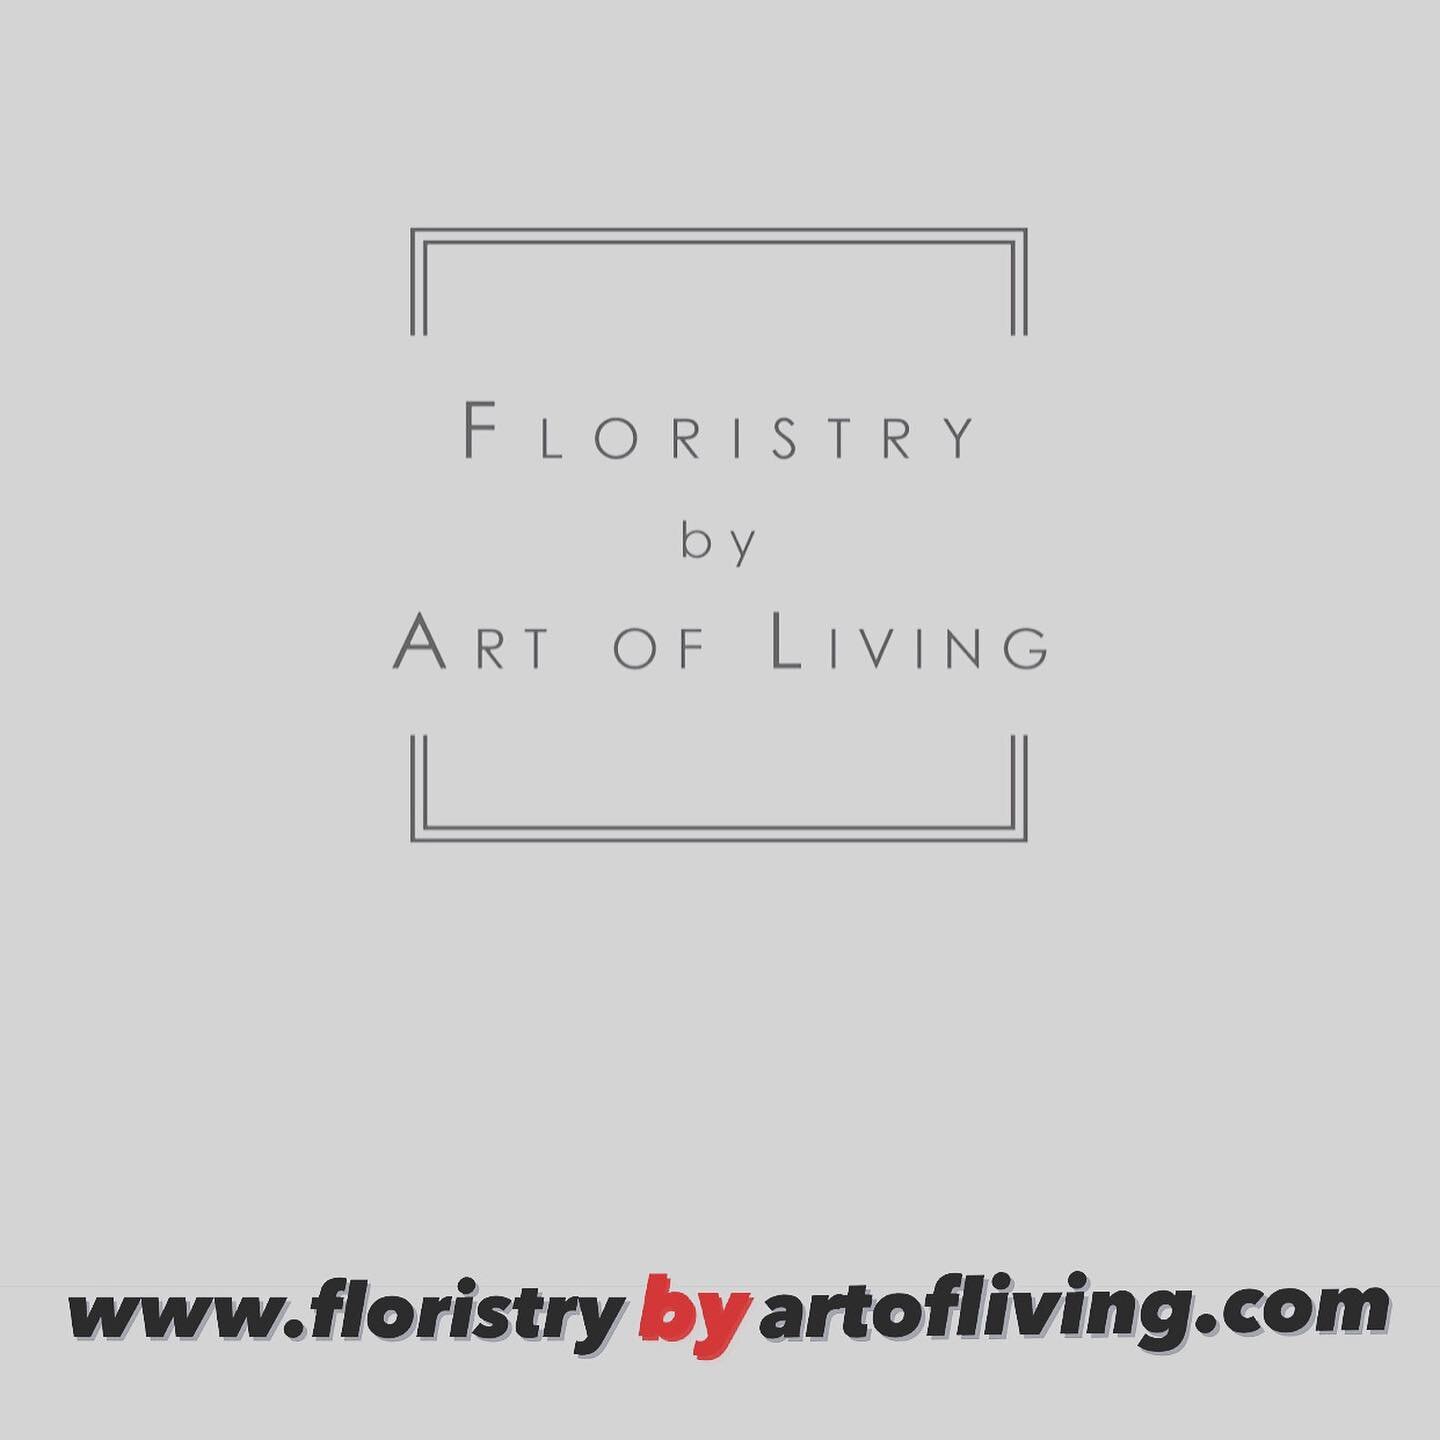 STATEMENT 

Floristry by Art of Living &trade;️ has been humbly introducing our aesthetic of flower jars and bouquets since 2018, that has been inspired by the learnings from meditation. 

However, it has come to our attention that an online store ha